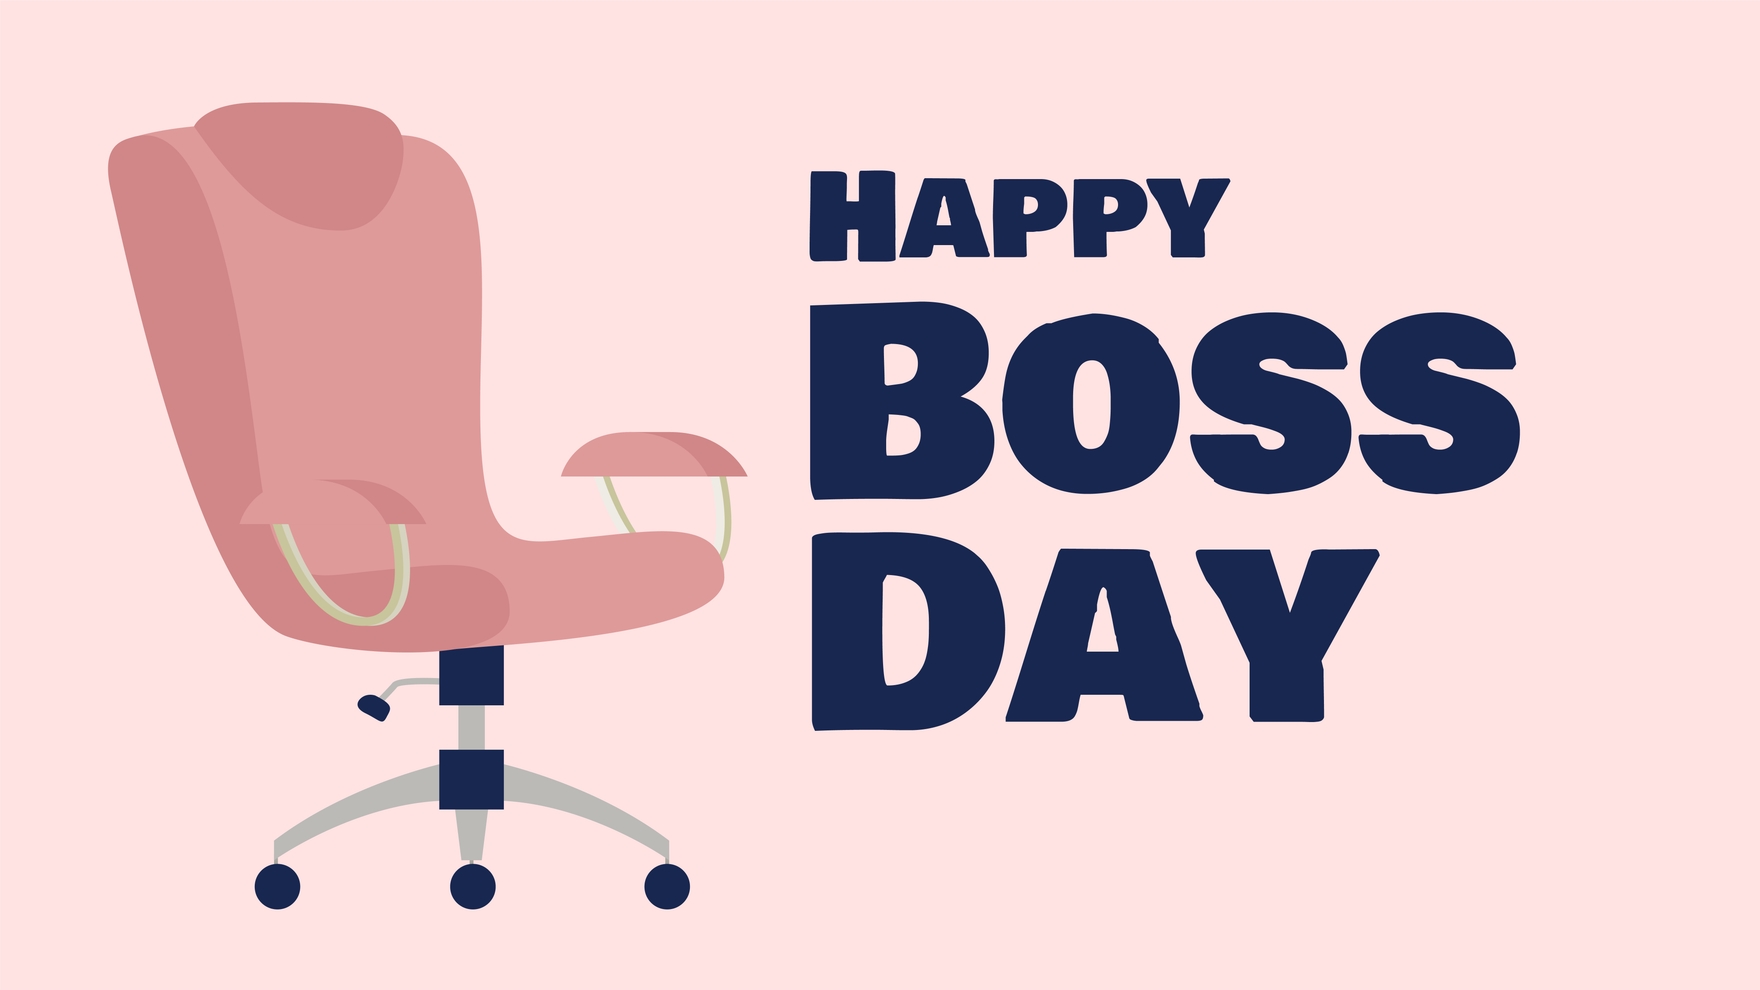 Boss' Day Image Background